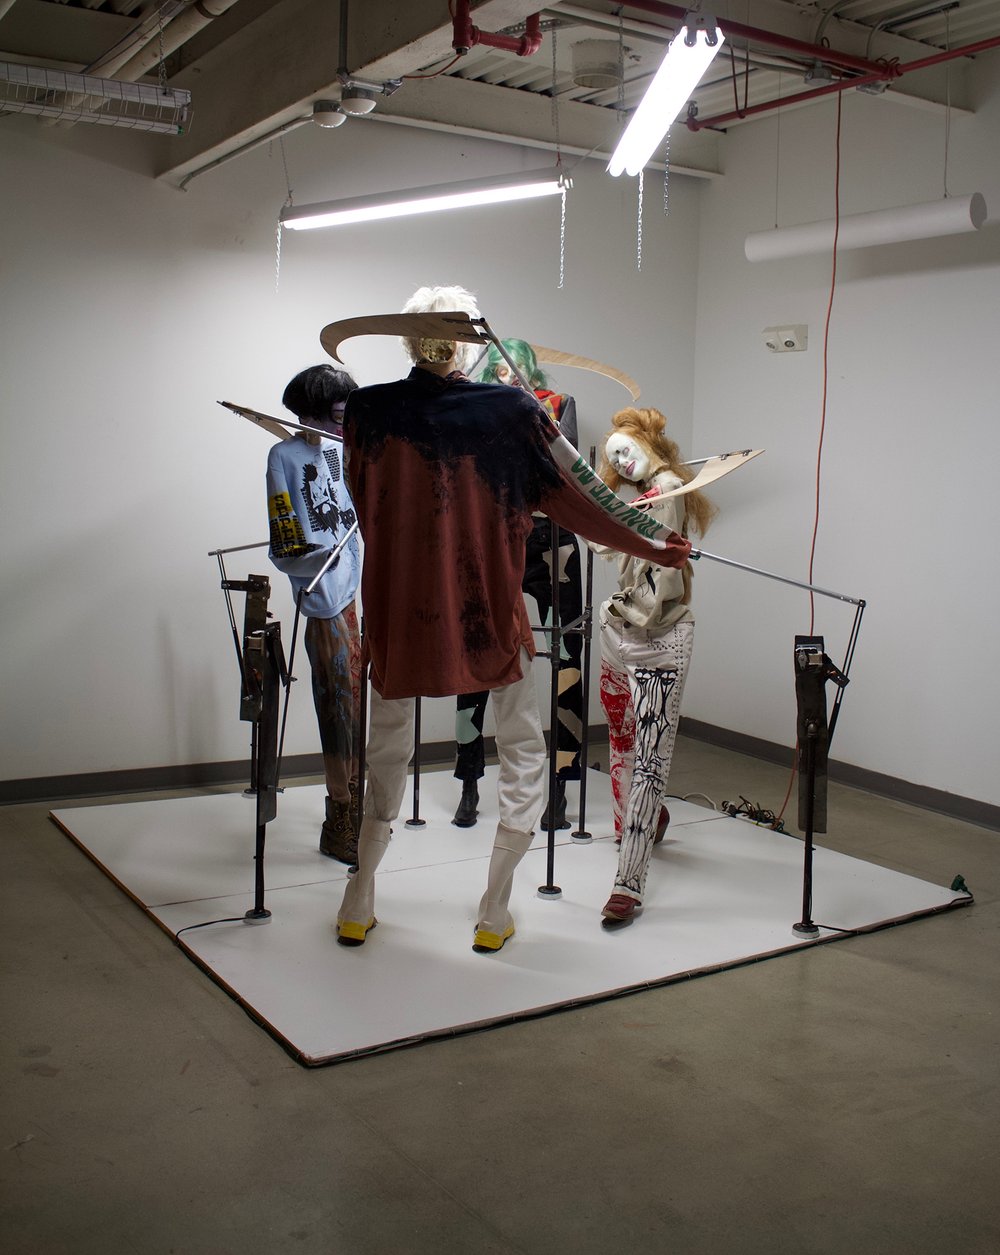  Anoushé Shojae-Chaghorvand,  If anyone is going to kill my friends, it’s going to be me , 2019, Silicone, synthetic/ horse/ artist’s hair, tattoo ink, steel, motors, plywood, found clothing, 96 x 96 inches.   